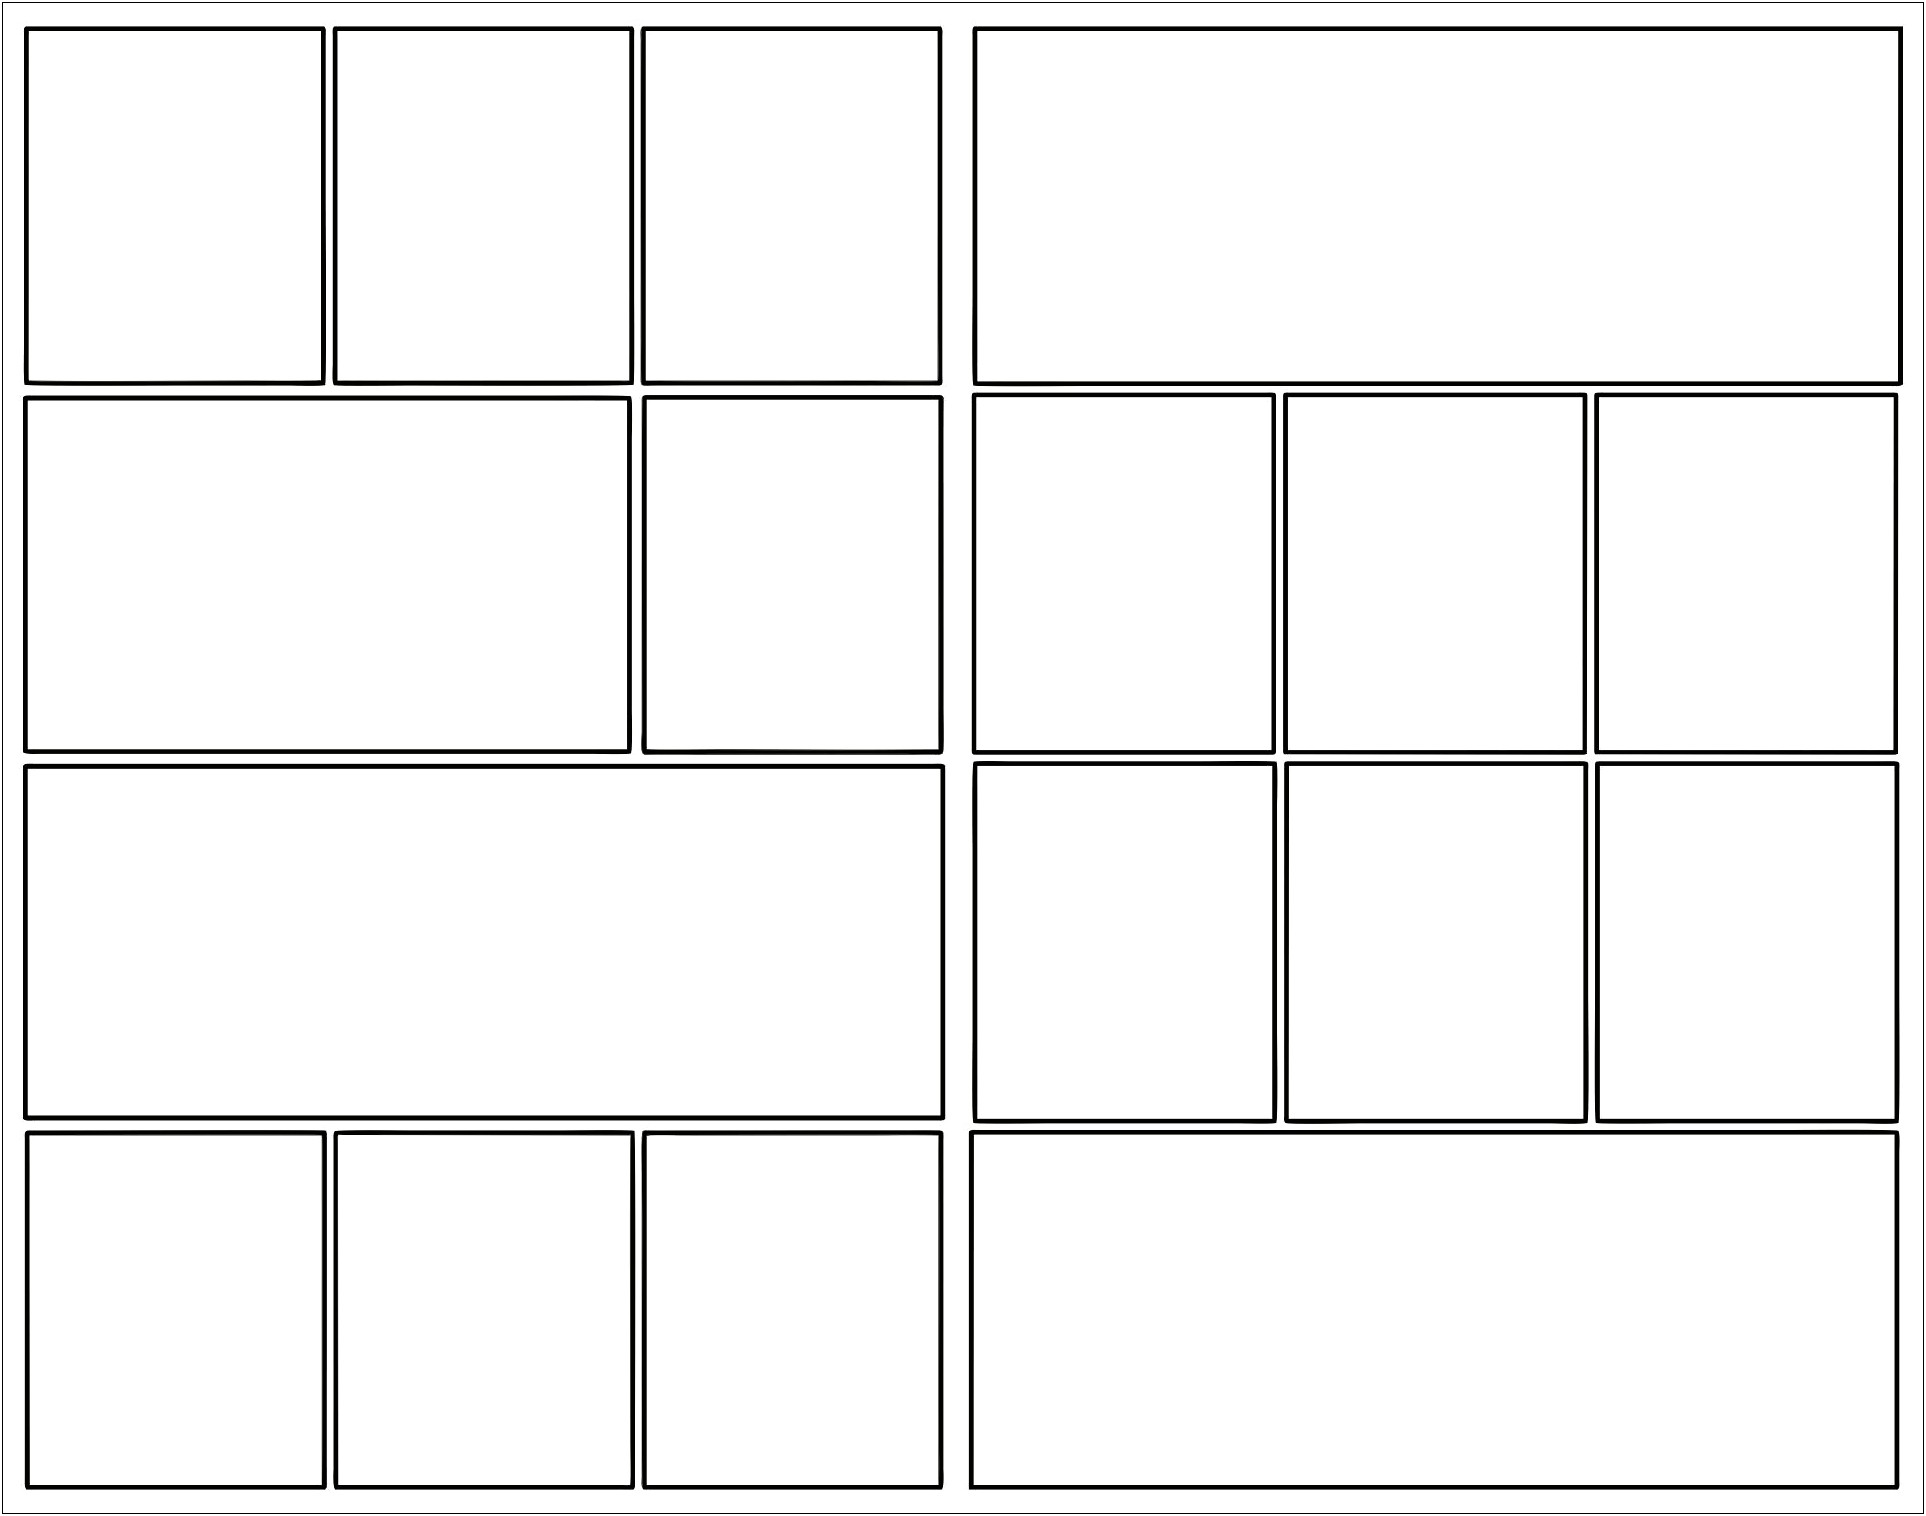 Comic Book Page Layout Template Free